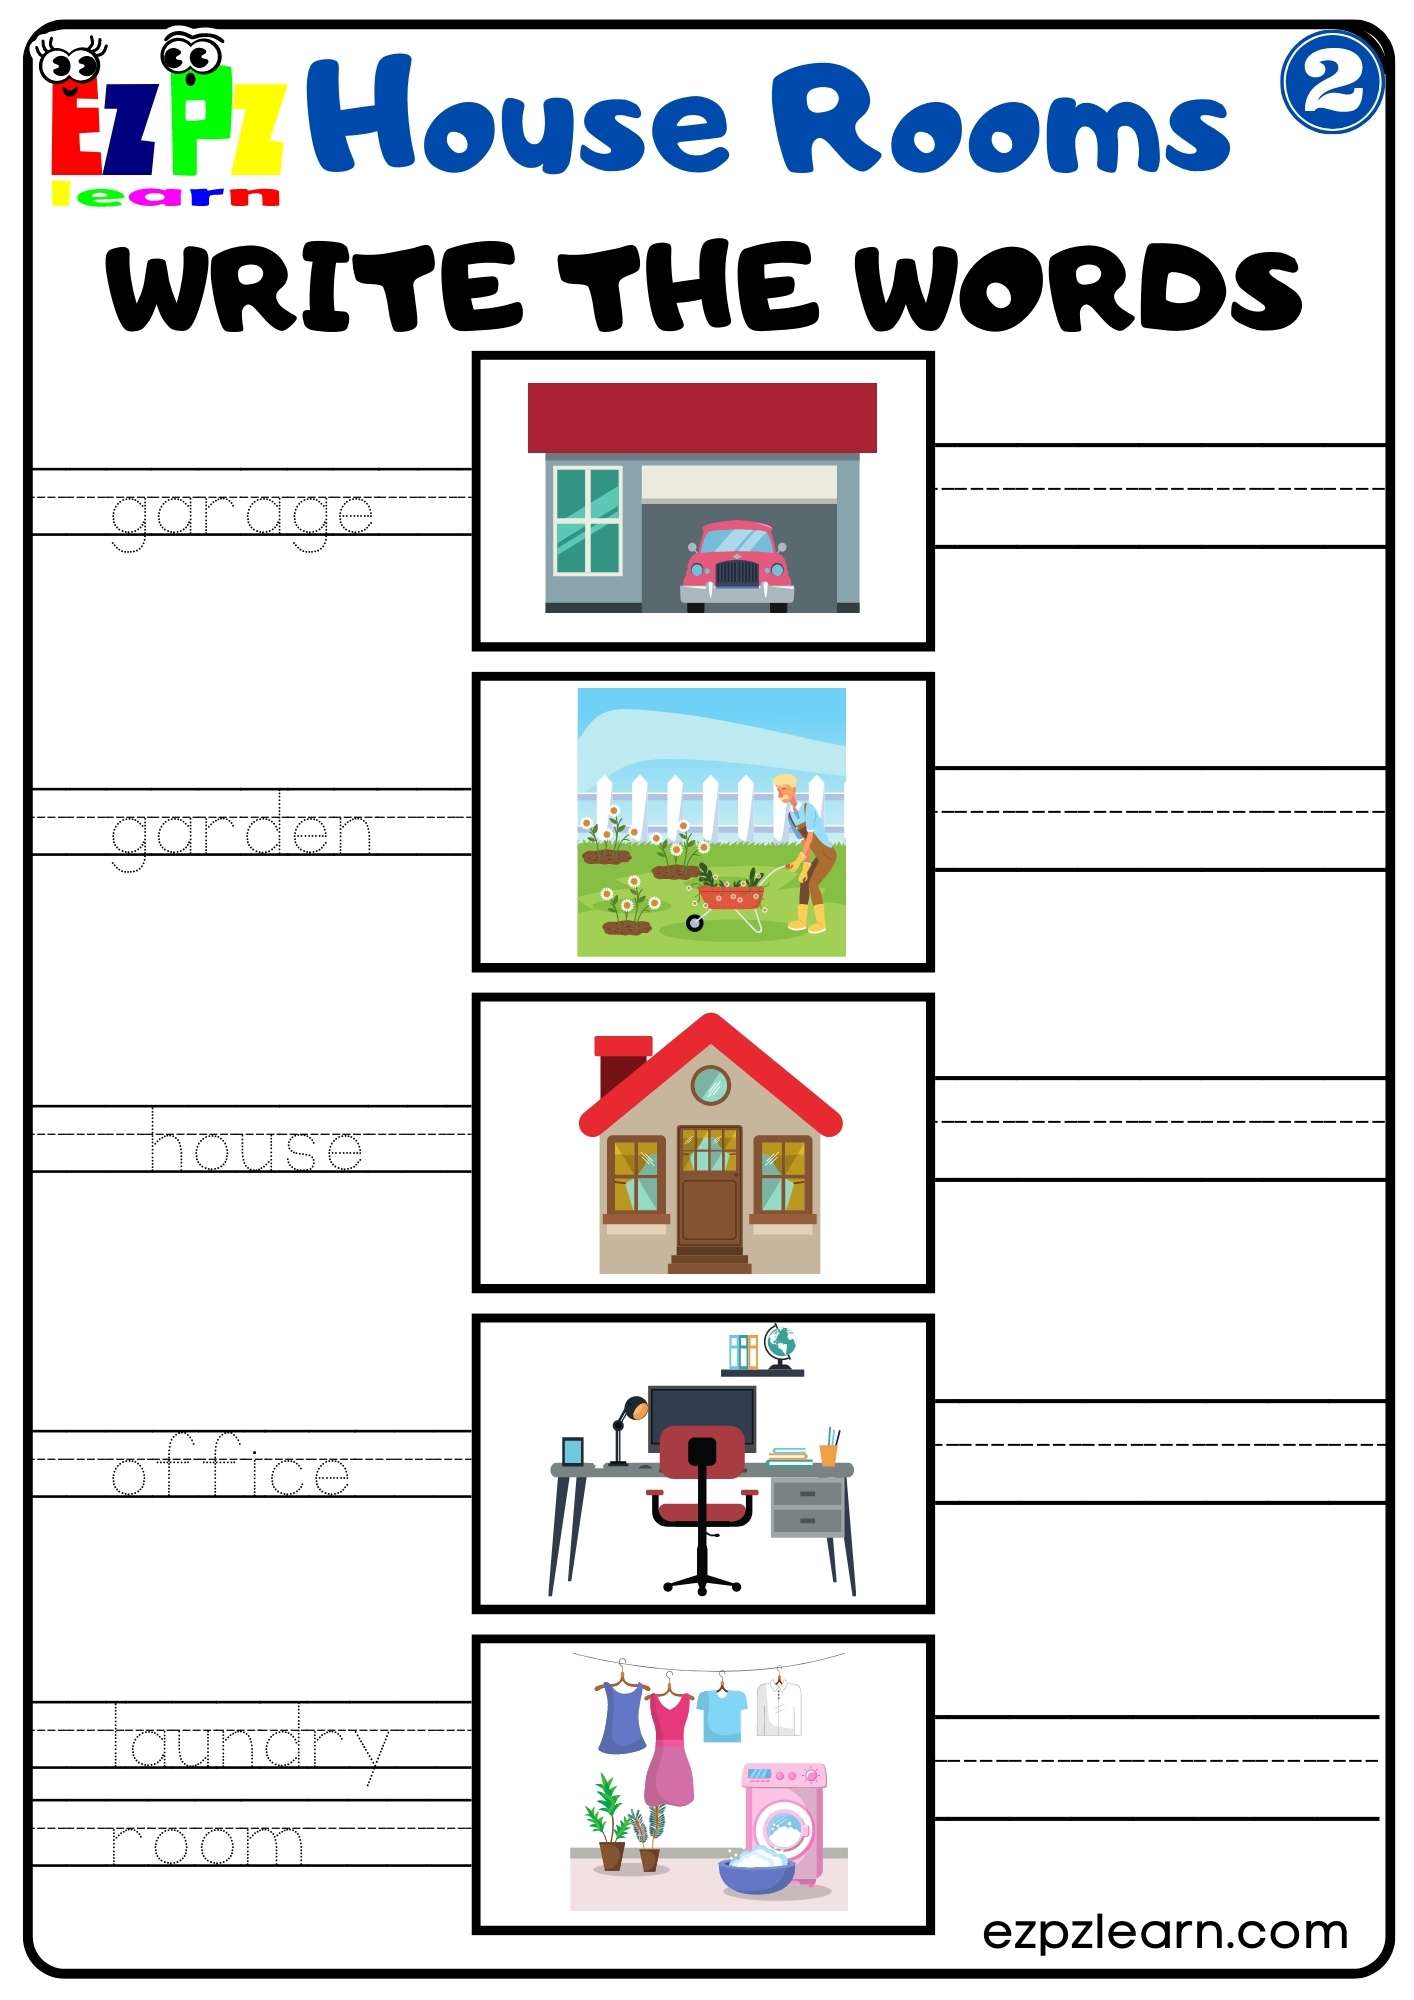 Learning the vocabulary for rooms in a house using pictures and words.